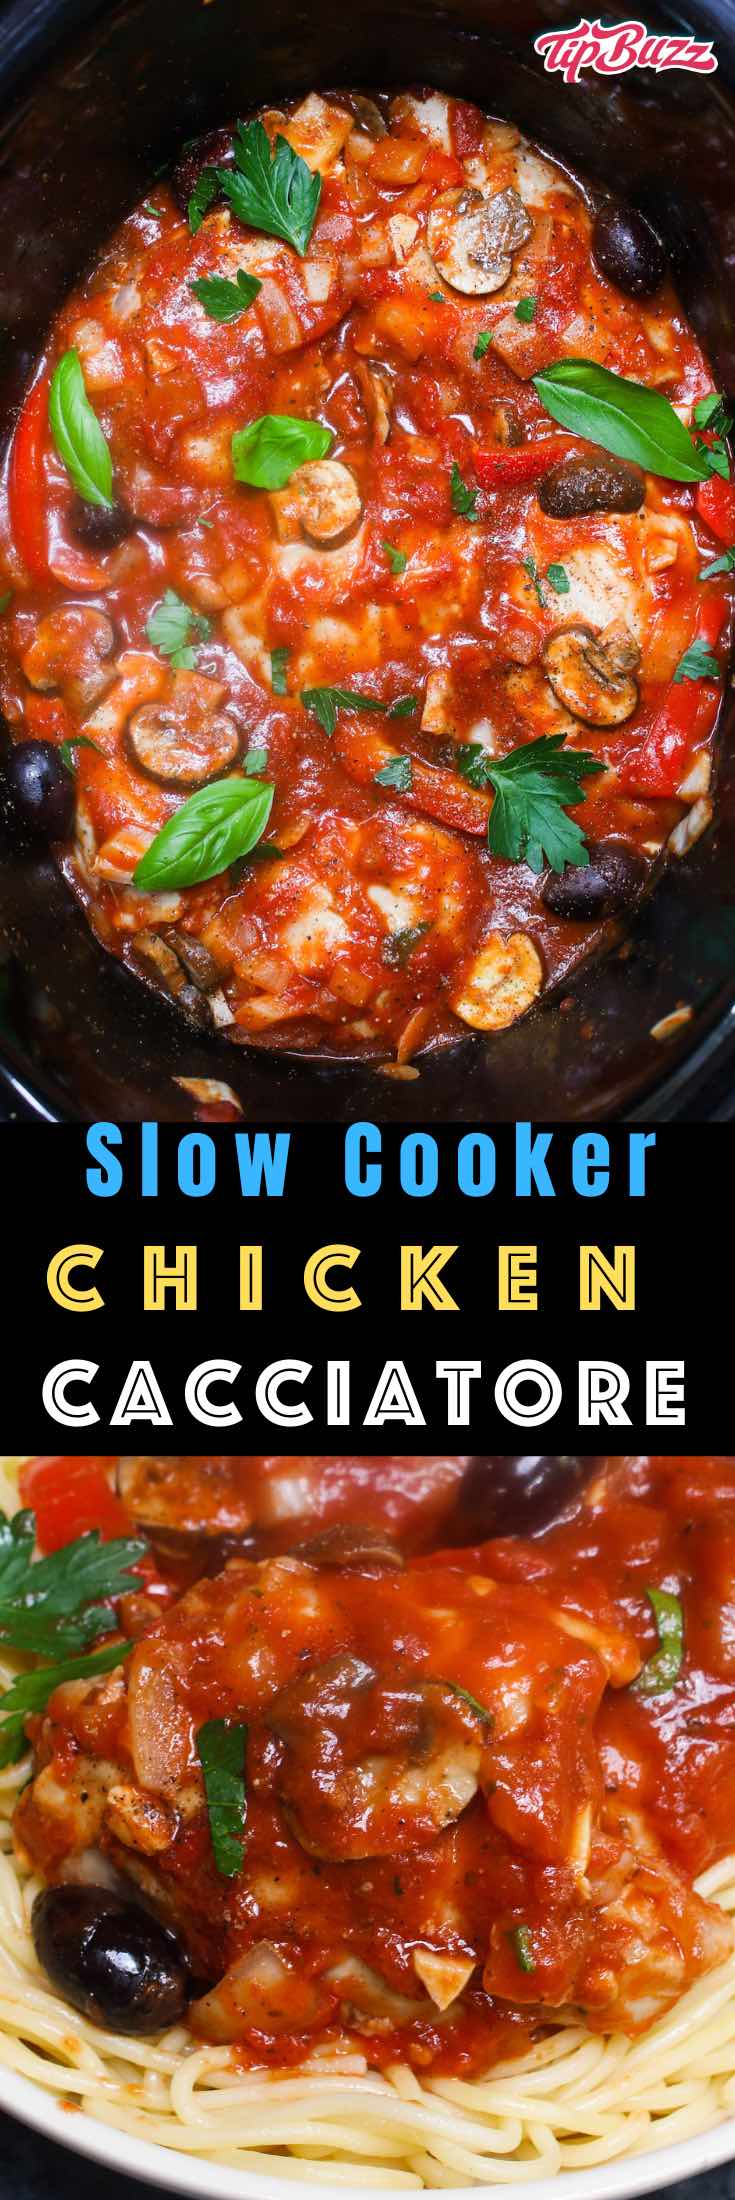 This easy and healthy Crock Pot Chicken Cacciatore is a tender and flavorful Italian chicken dinner recipe made in a slow cooker. Chicken thighs or chicken breasts are simmered in a rich and mouth-watering cacciatore sauce, absorbing all the delicious flavors!